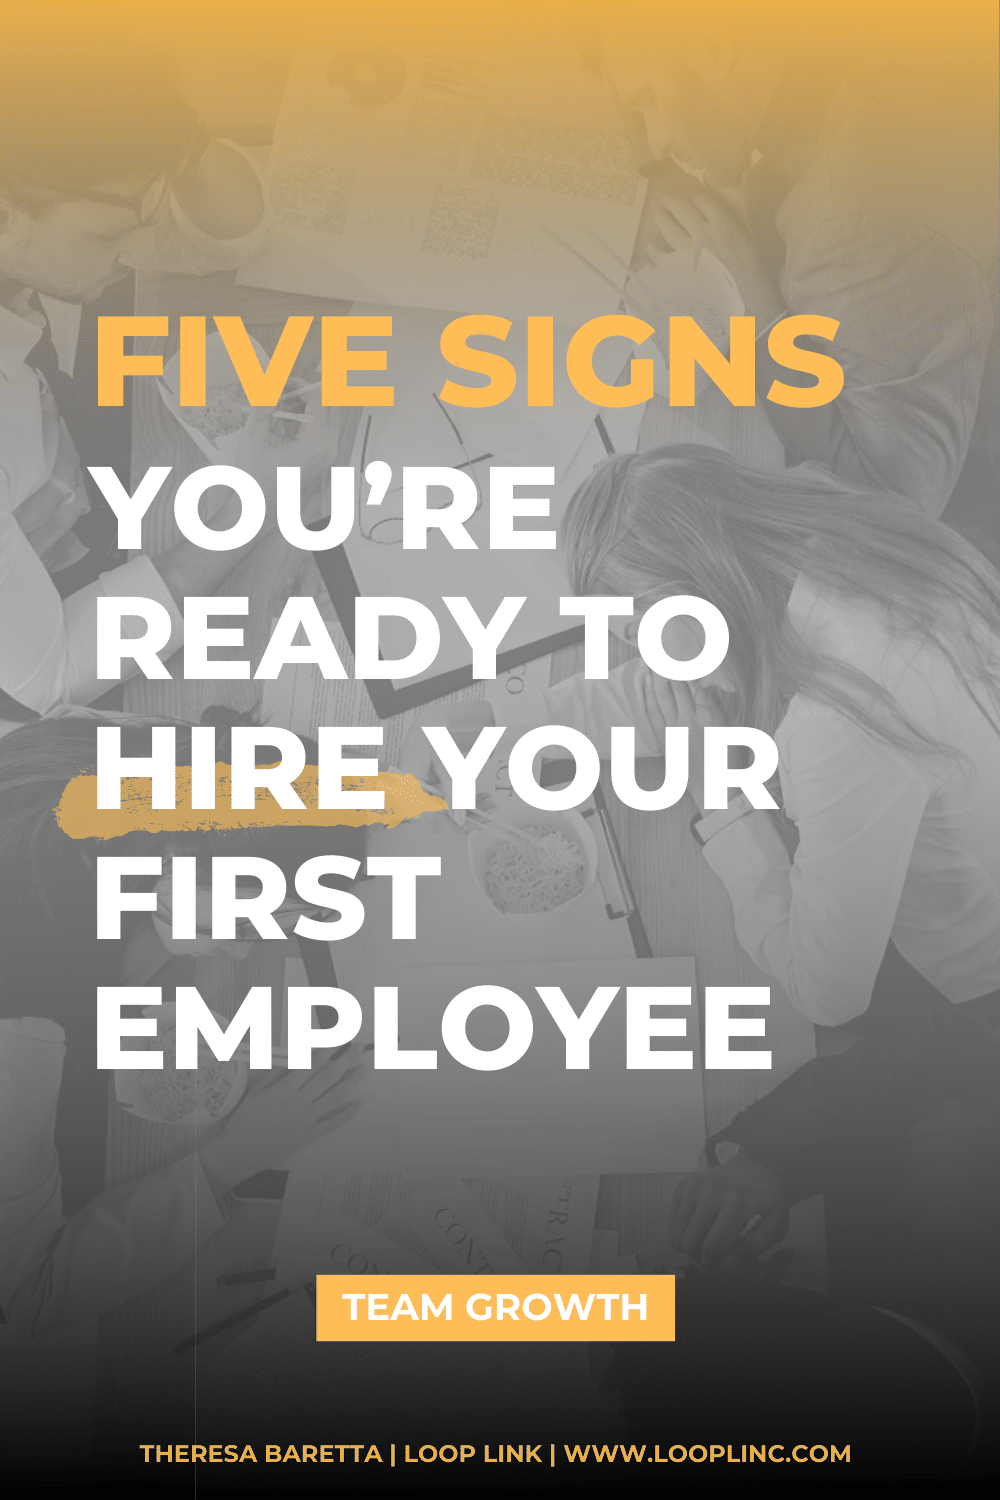 5 Signs You’re Ready to Hire Your First Employee